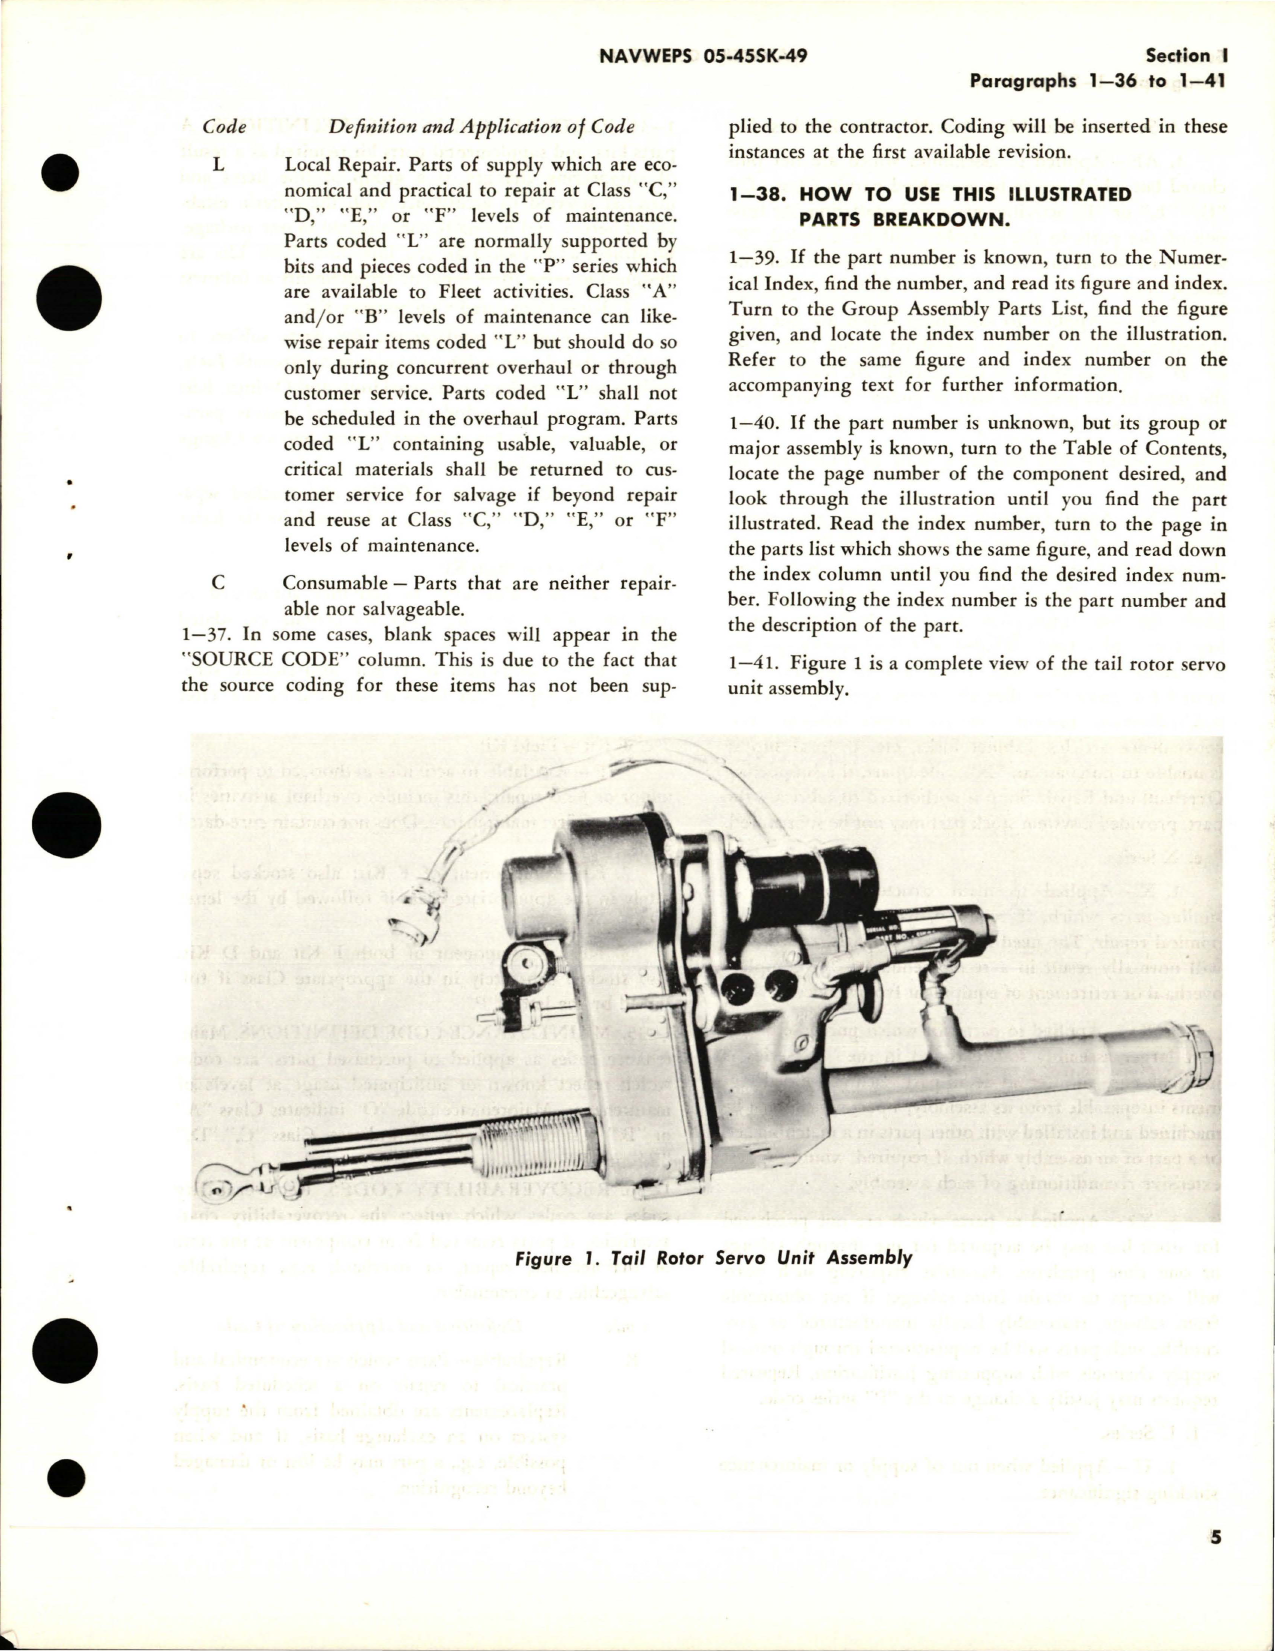 Sample page 7 from AirCorps Library document: Illustrated Parts Breakdown for Tail Rotor Servo Unit Assembly - Part S1665-61752 and Tail Rotor Servo Unit Subassembly - Part S1665-61752-1